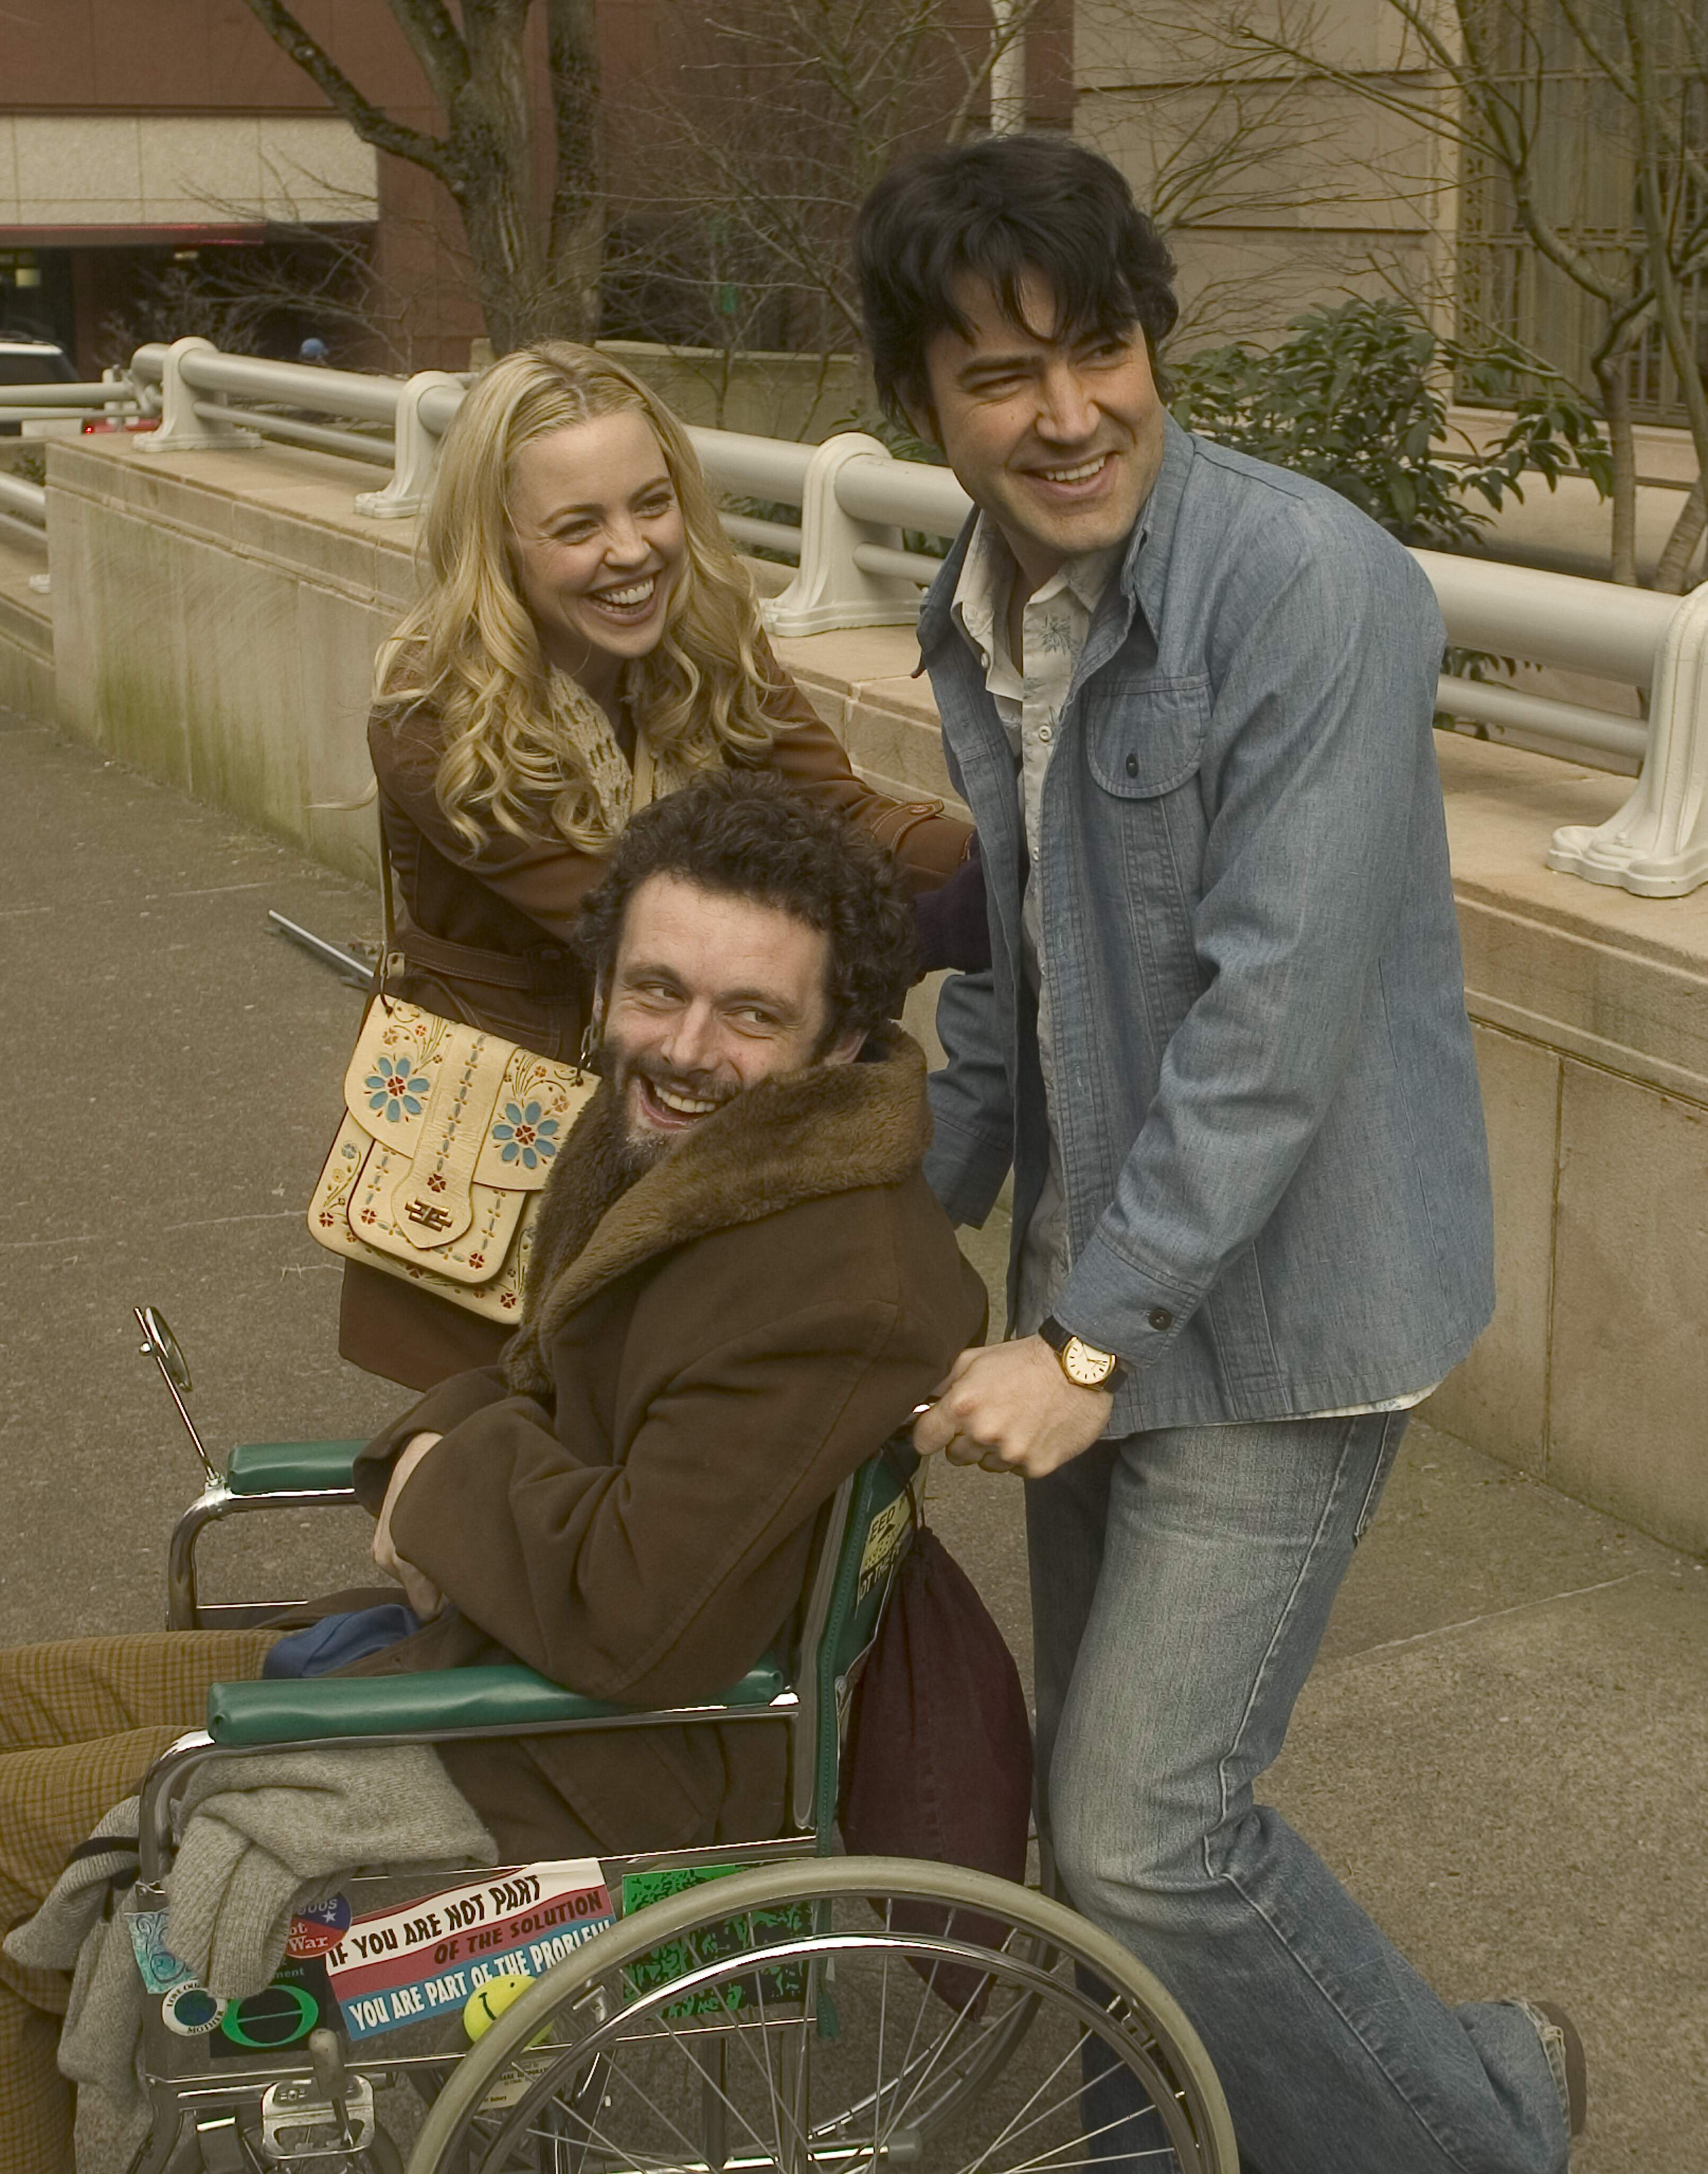 Ron Livingston as Richard Pimentel, Michael Sheen as Art Honeyman and Melissa George as Christine in MGM Films' Music Within (2007)